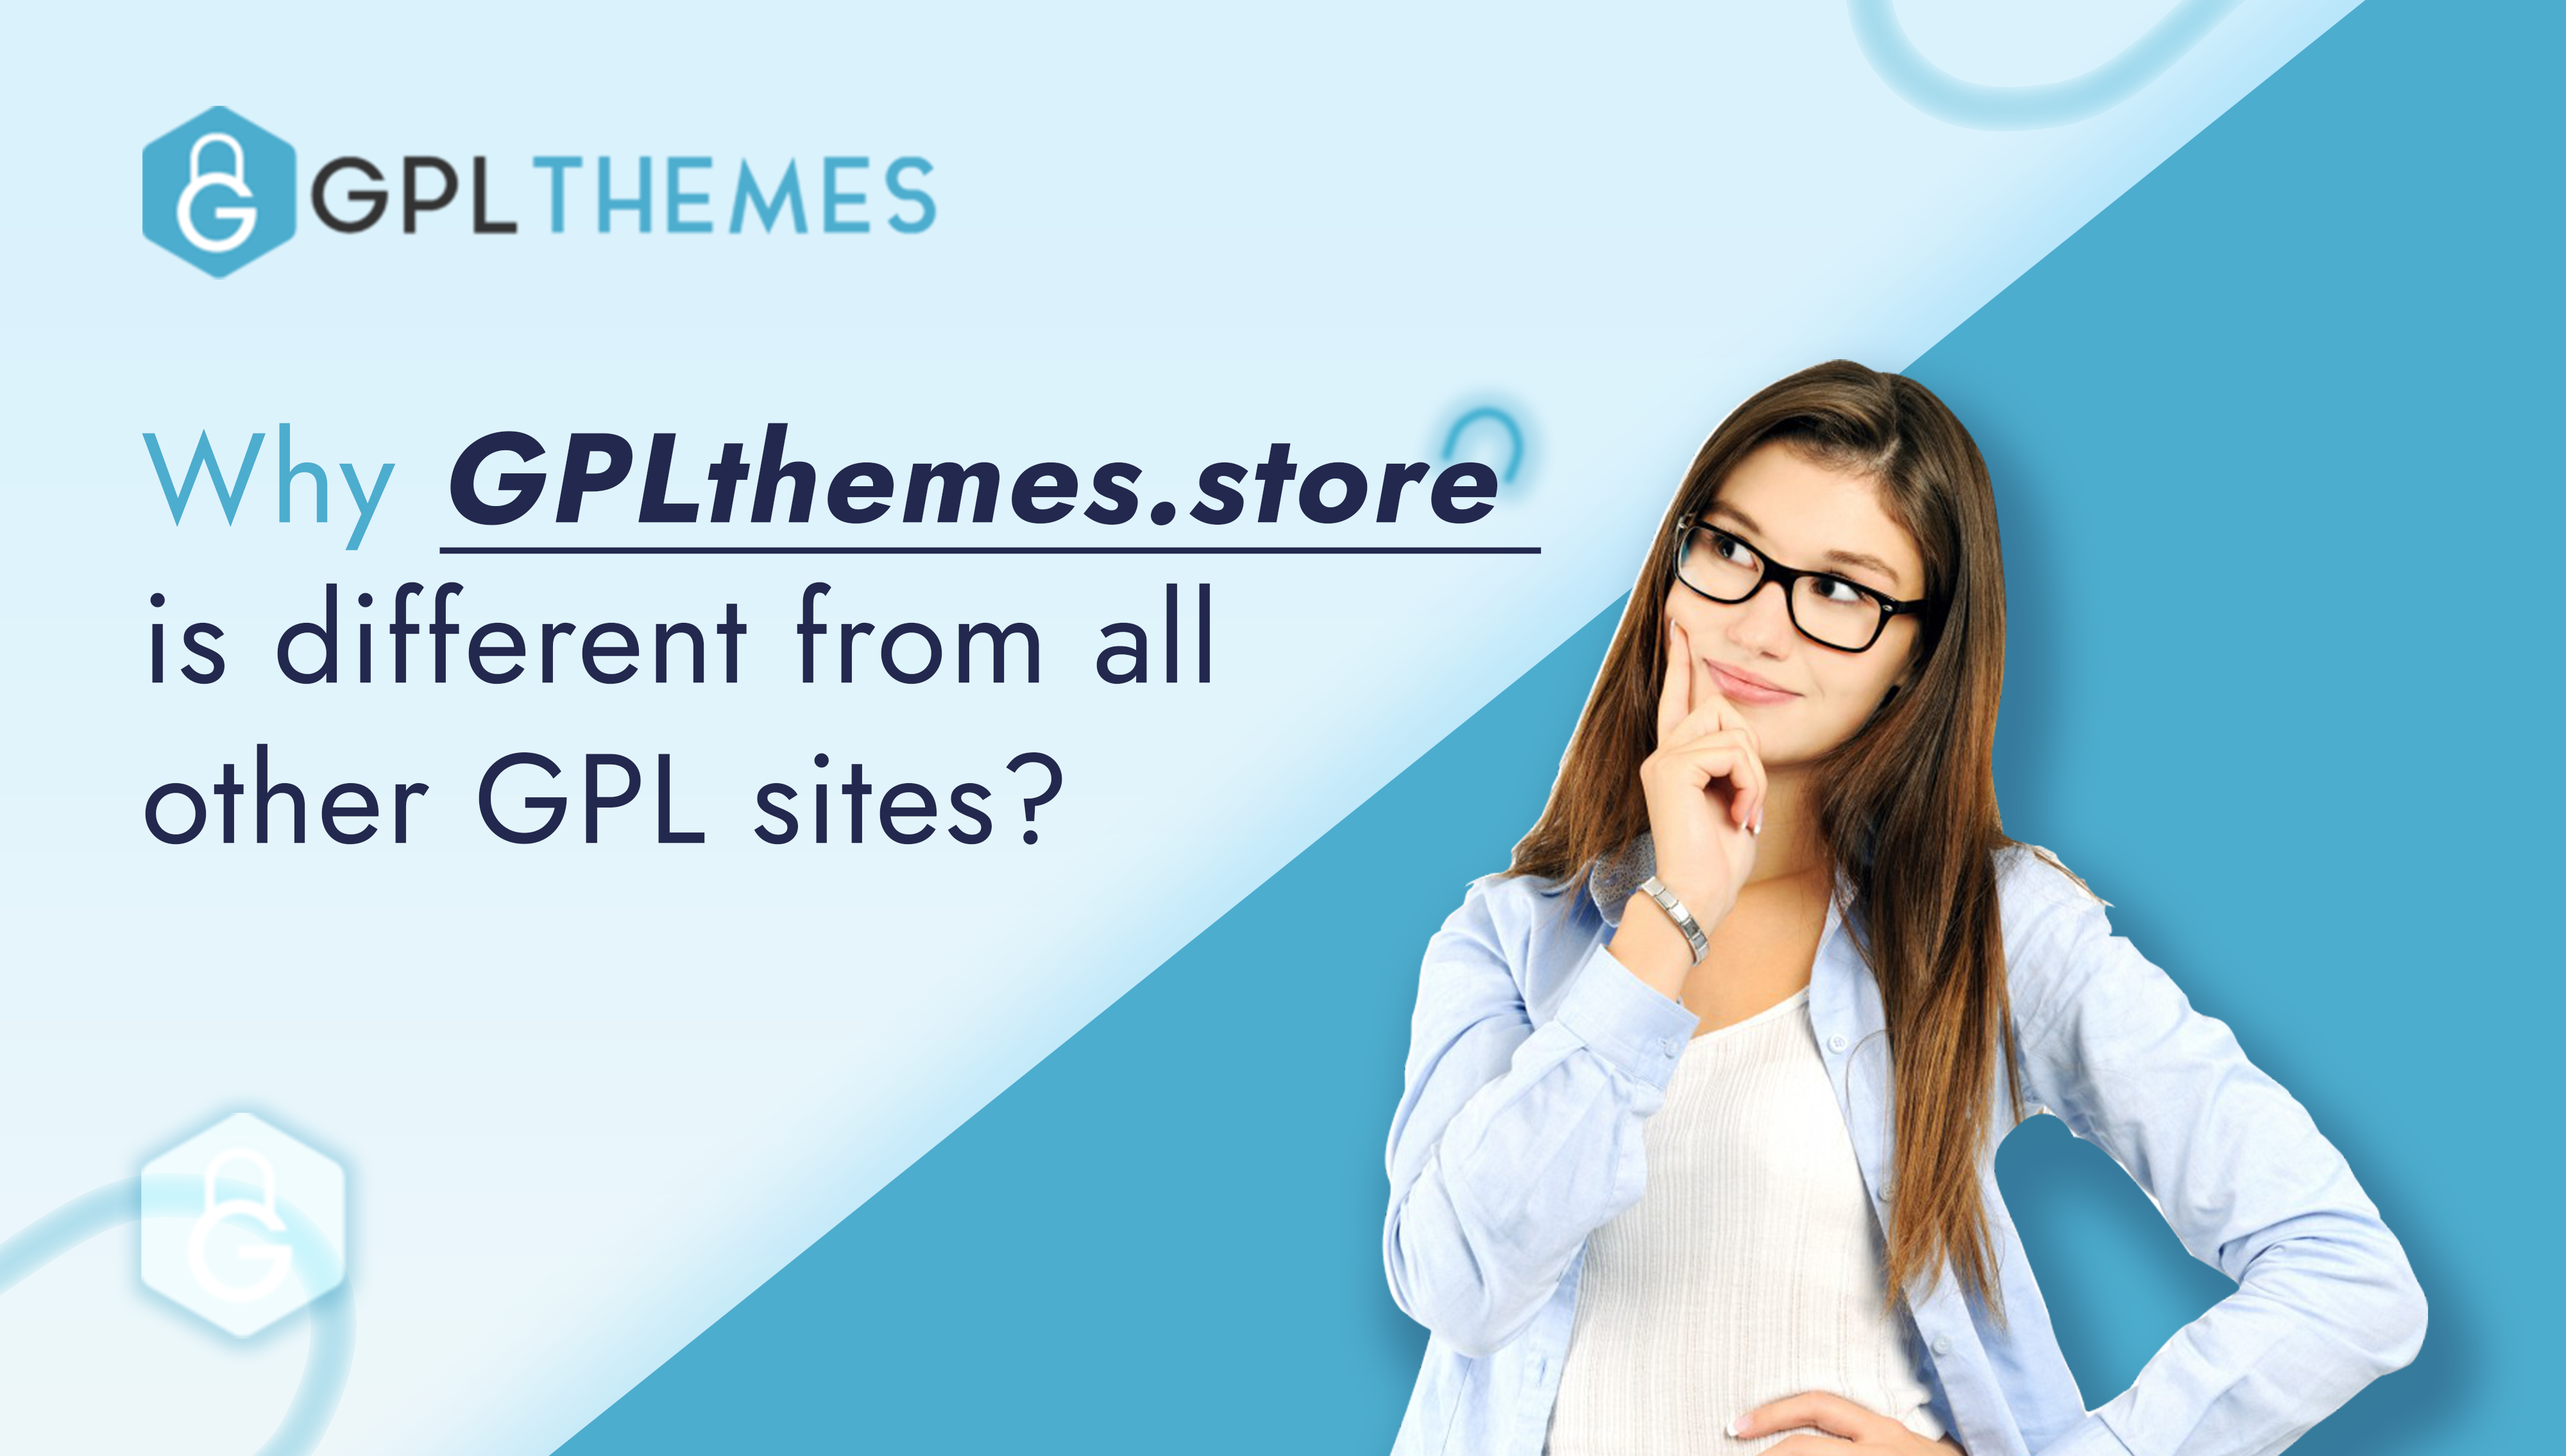 Why GPLthemes.store is different from all other GPL sites